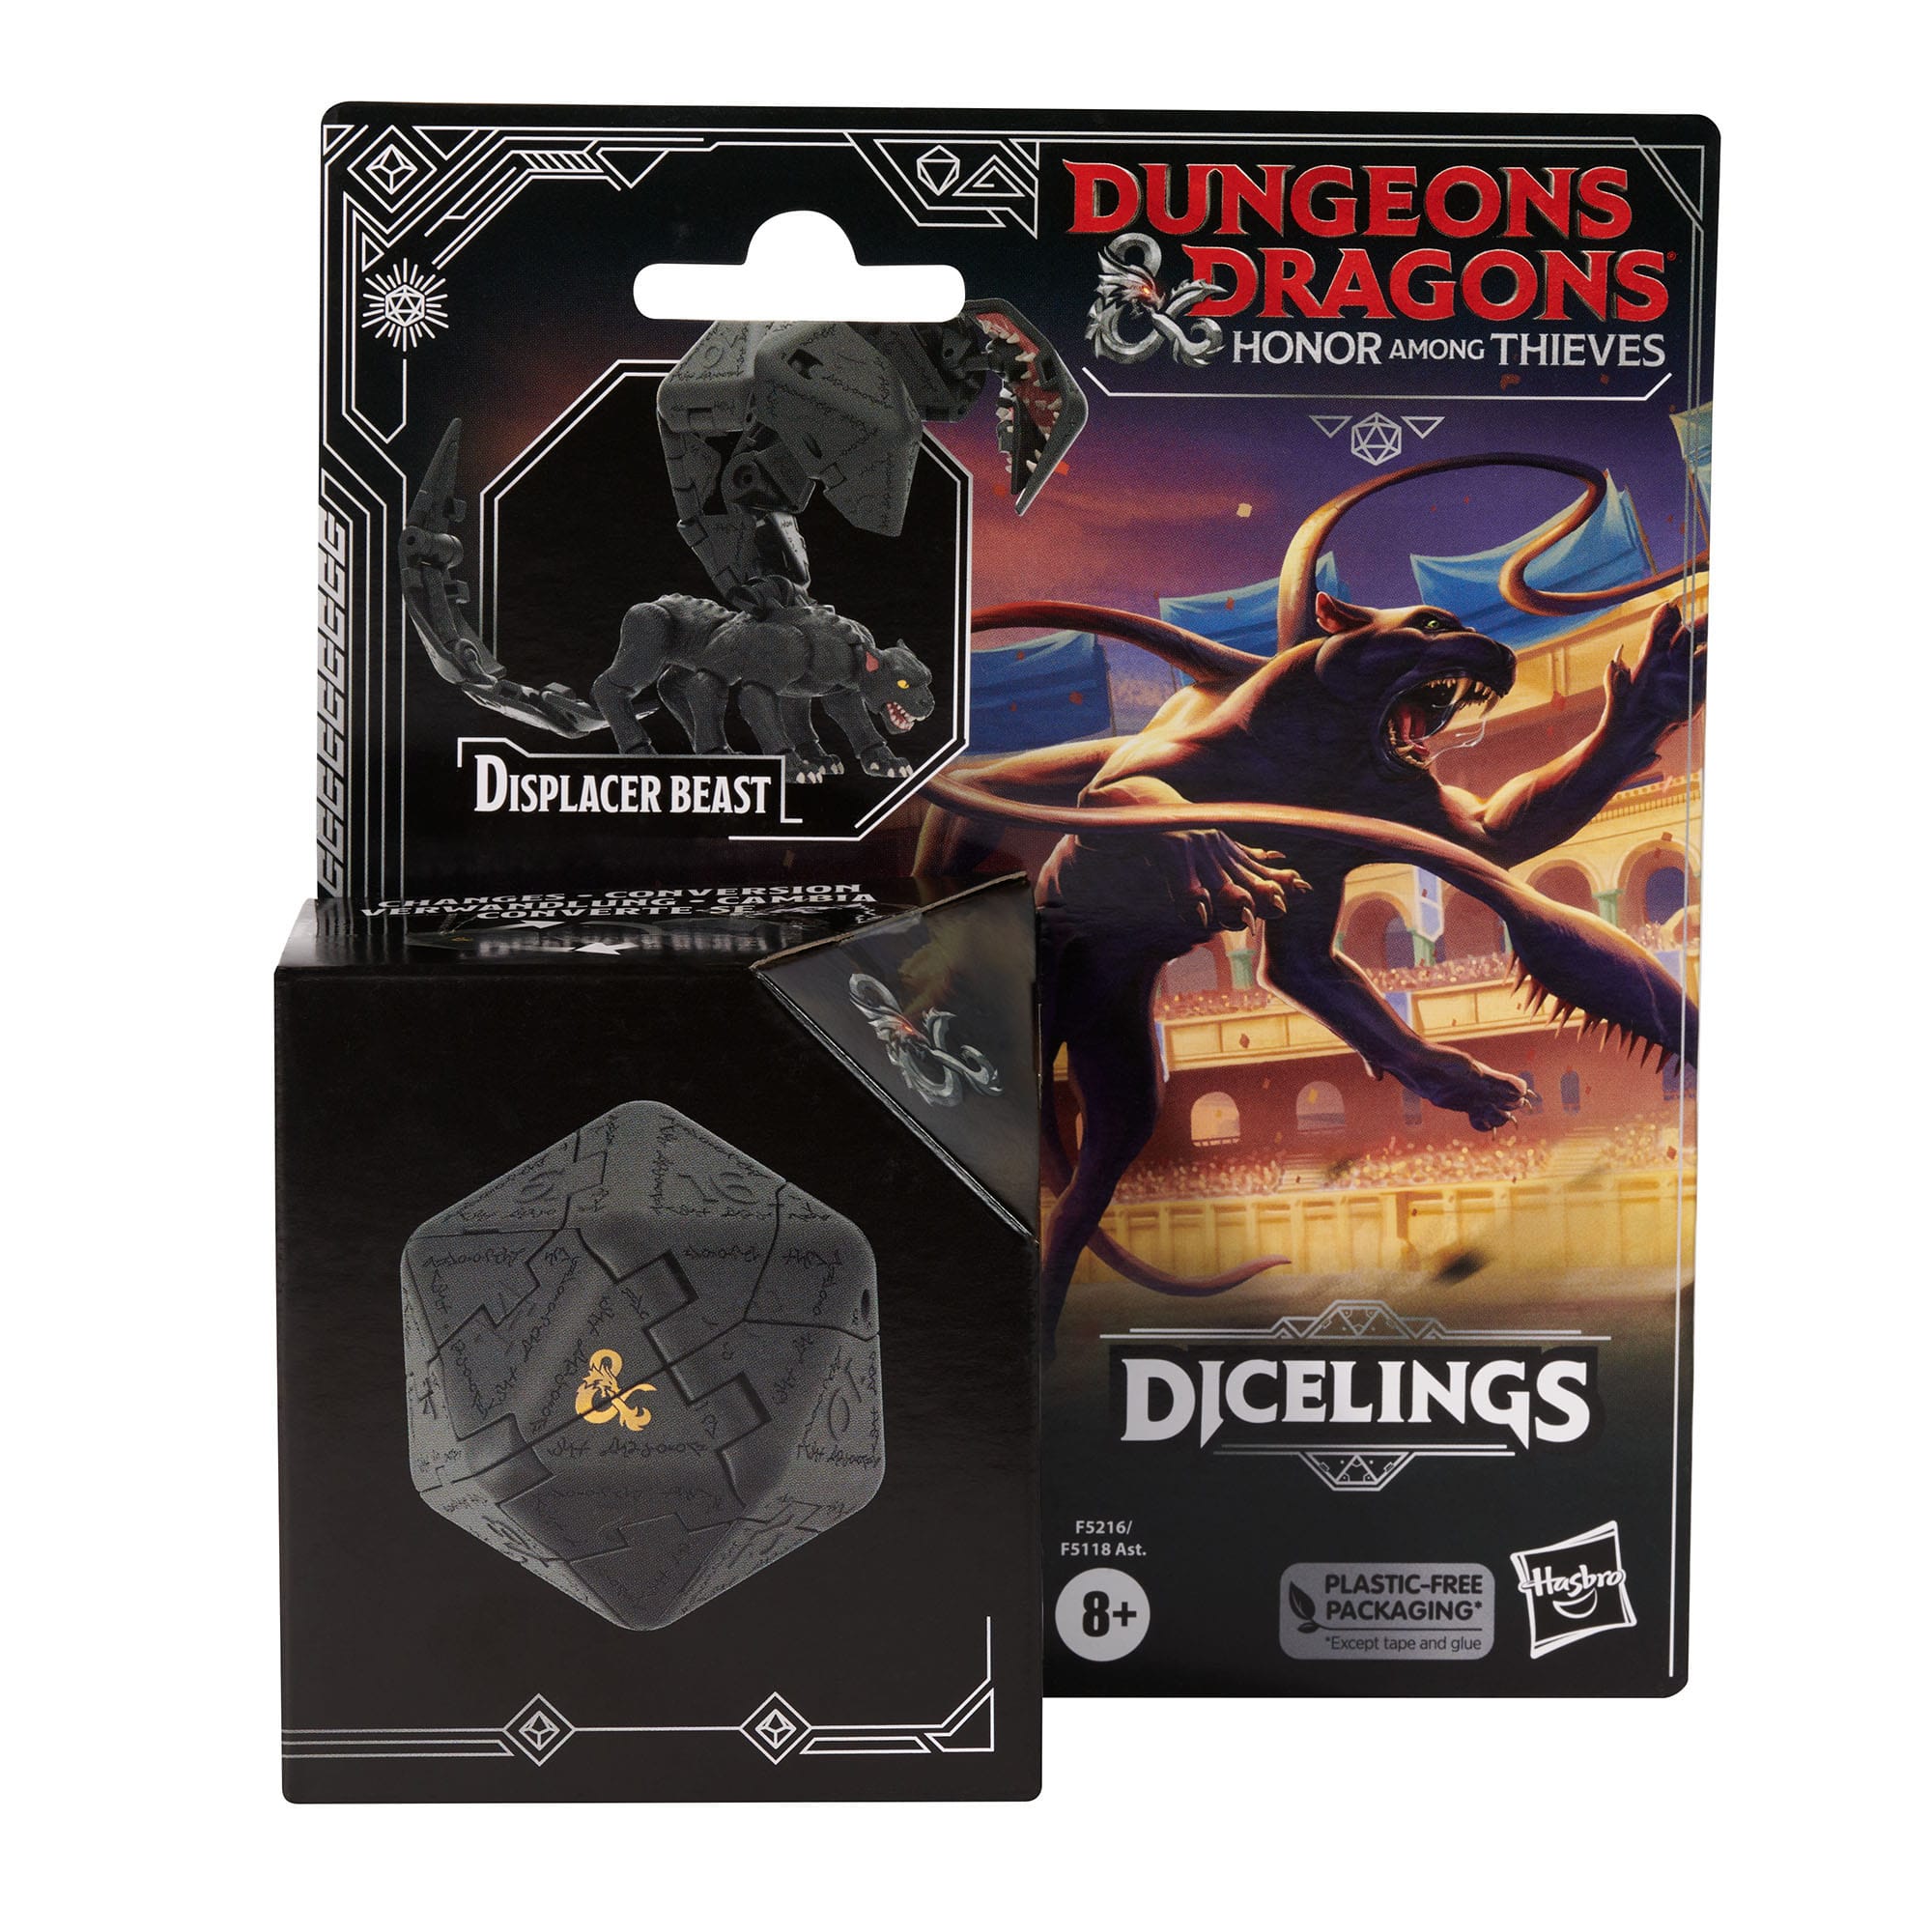 Dungeons & Dragons: Honor Among Thieves Dicelings Action Figure Displacer Beast - Loaded Dice Barry Vale of Glamorgan CF64 3HD